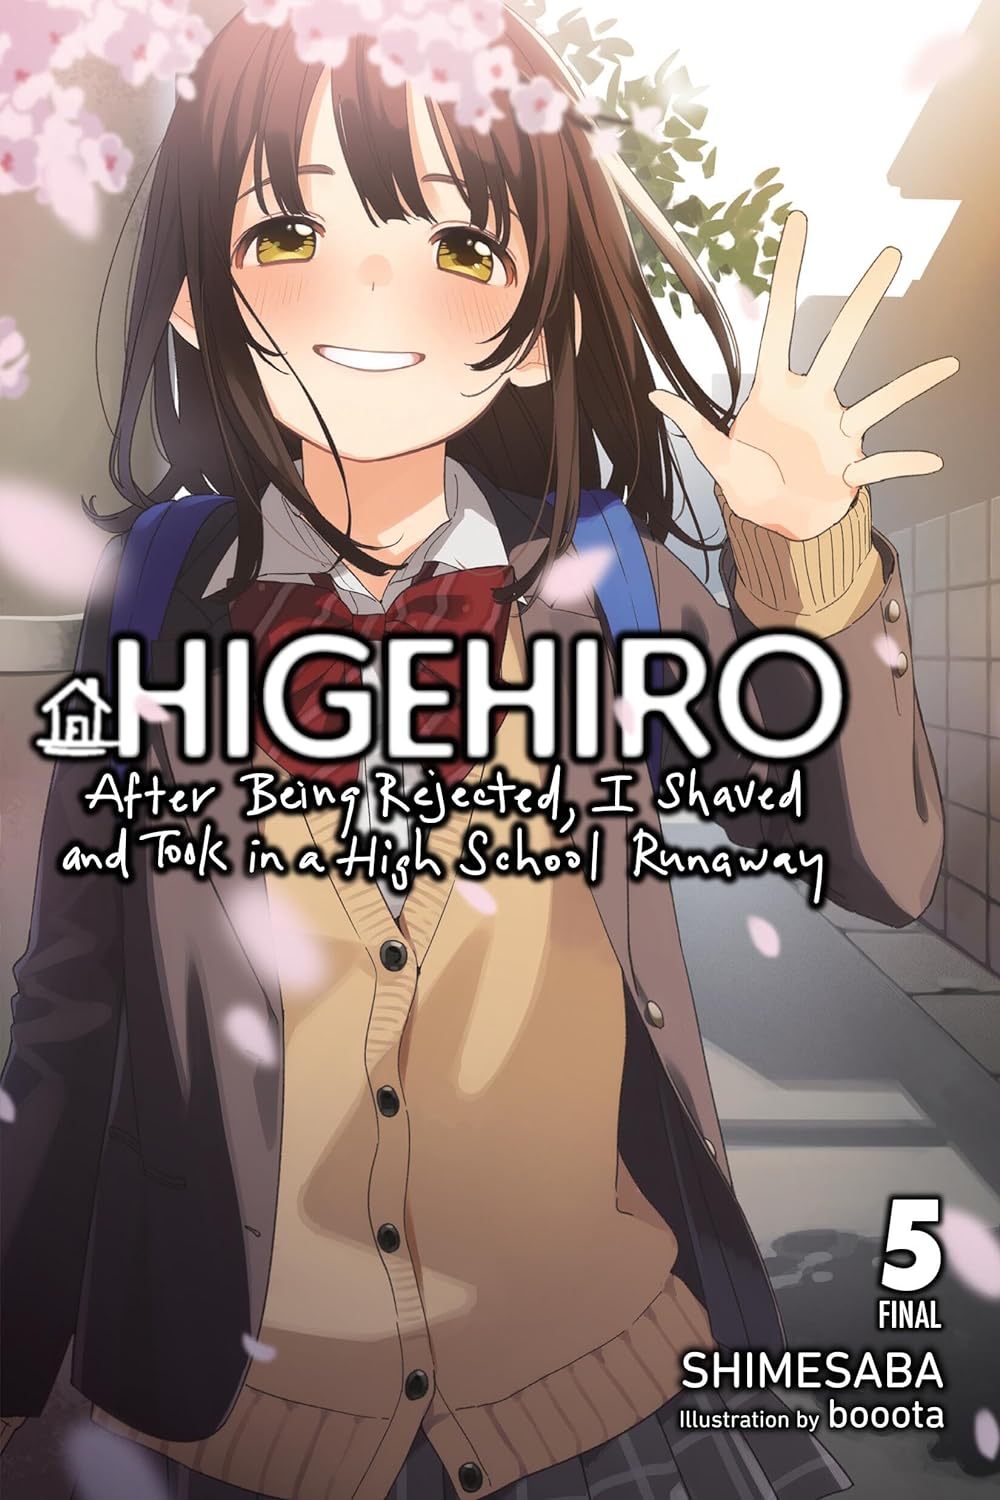 (21/11/2023) Higehiro: After Getting Rejected, I Shaved and Took in a High School Runaway Vol. 05 (Light Novel)